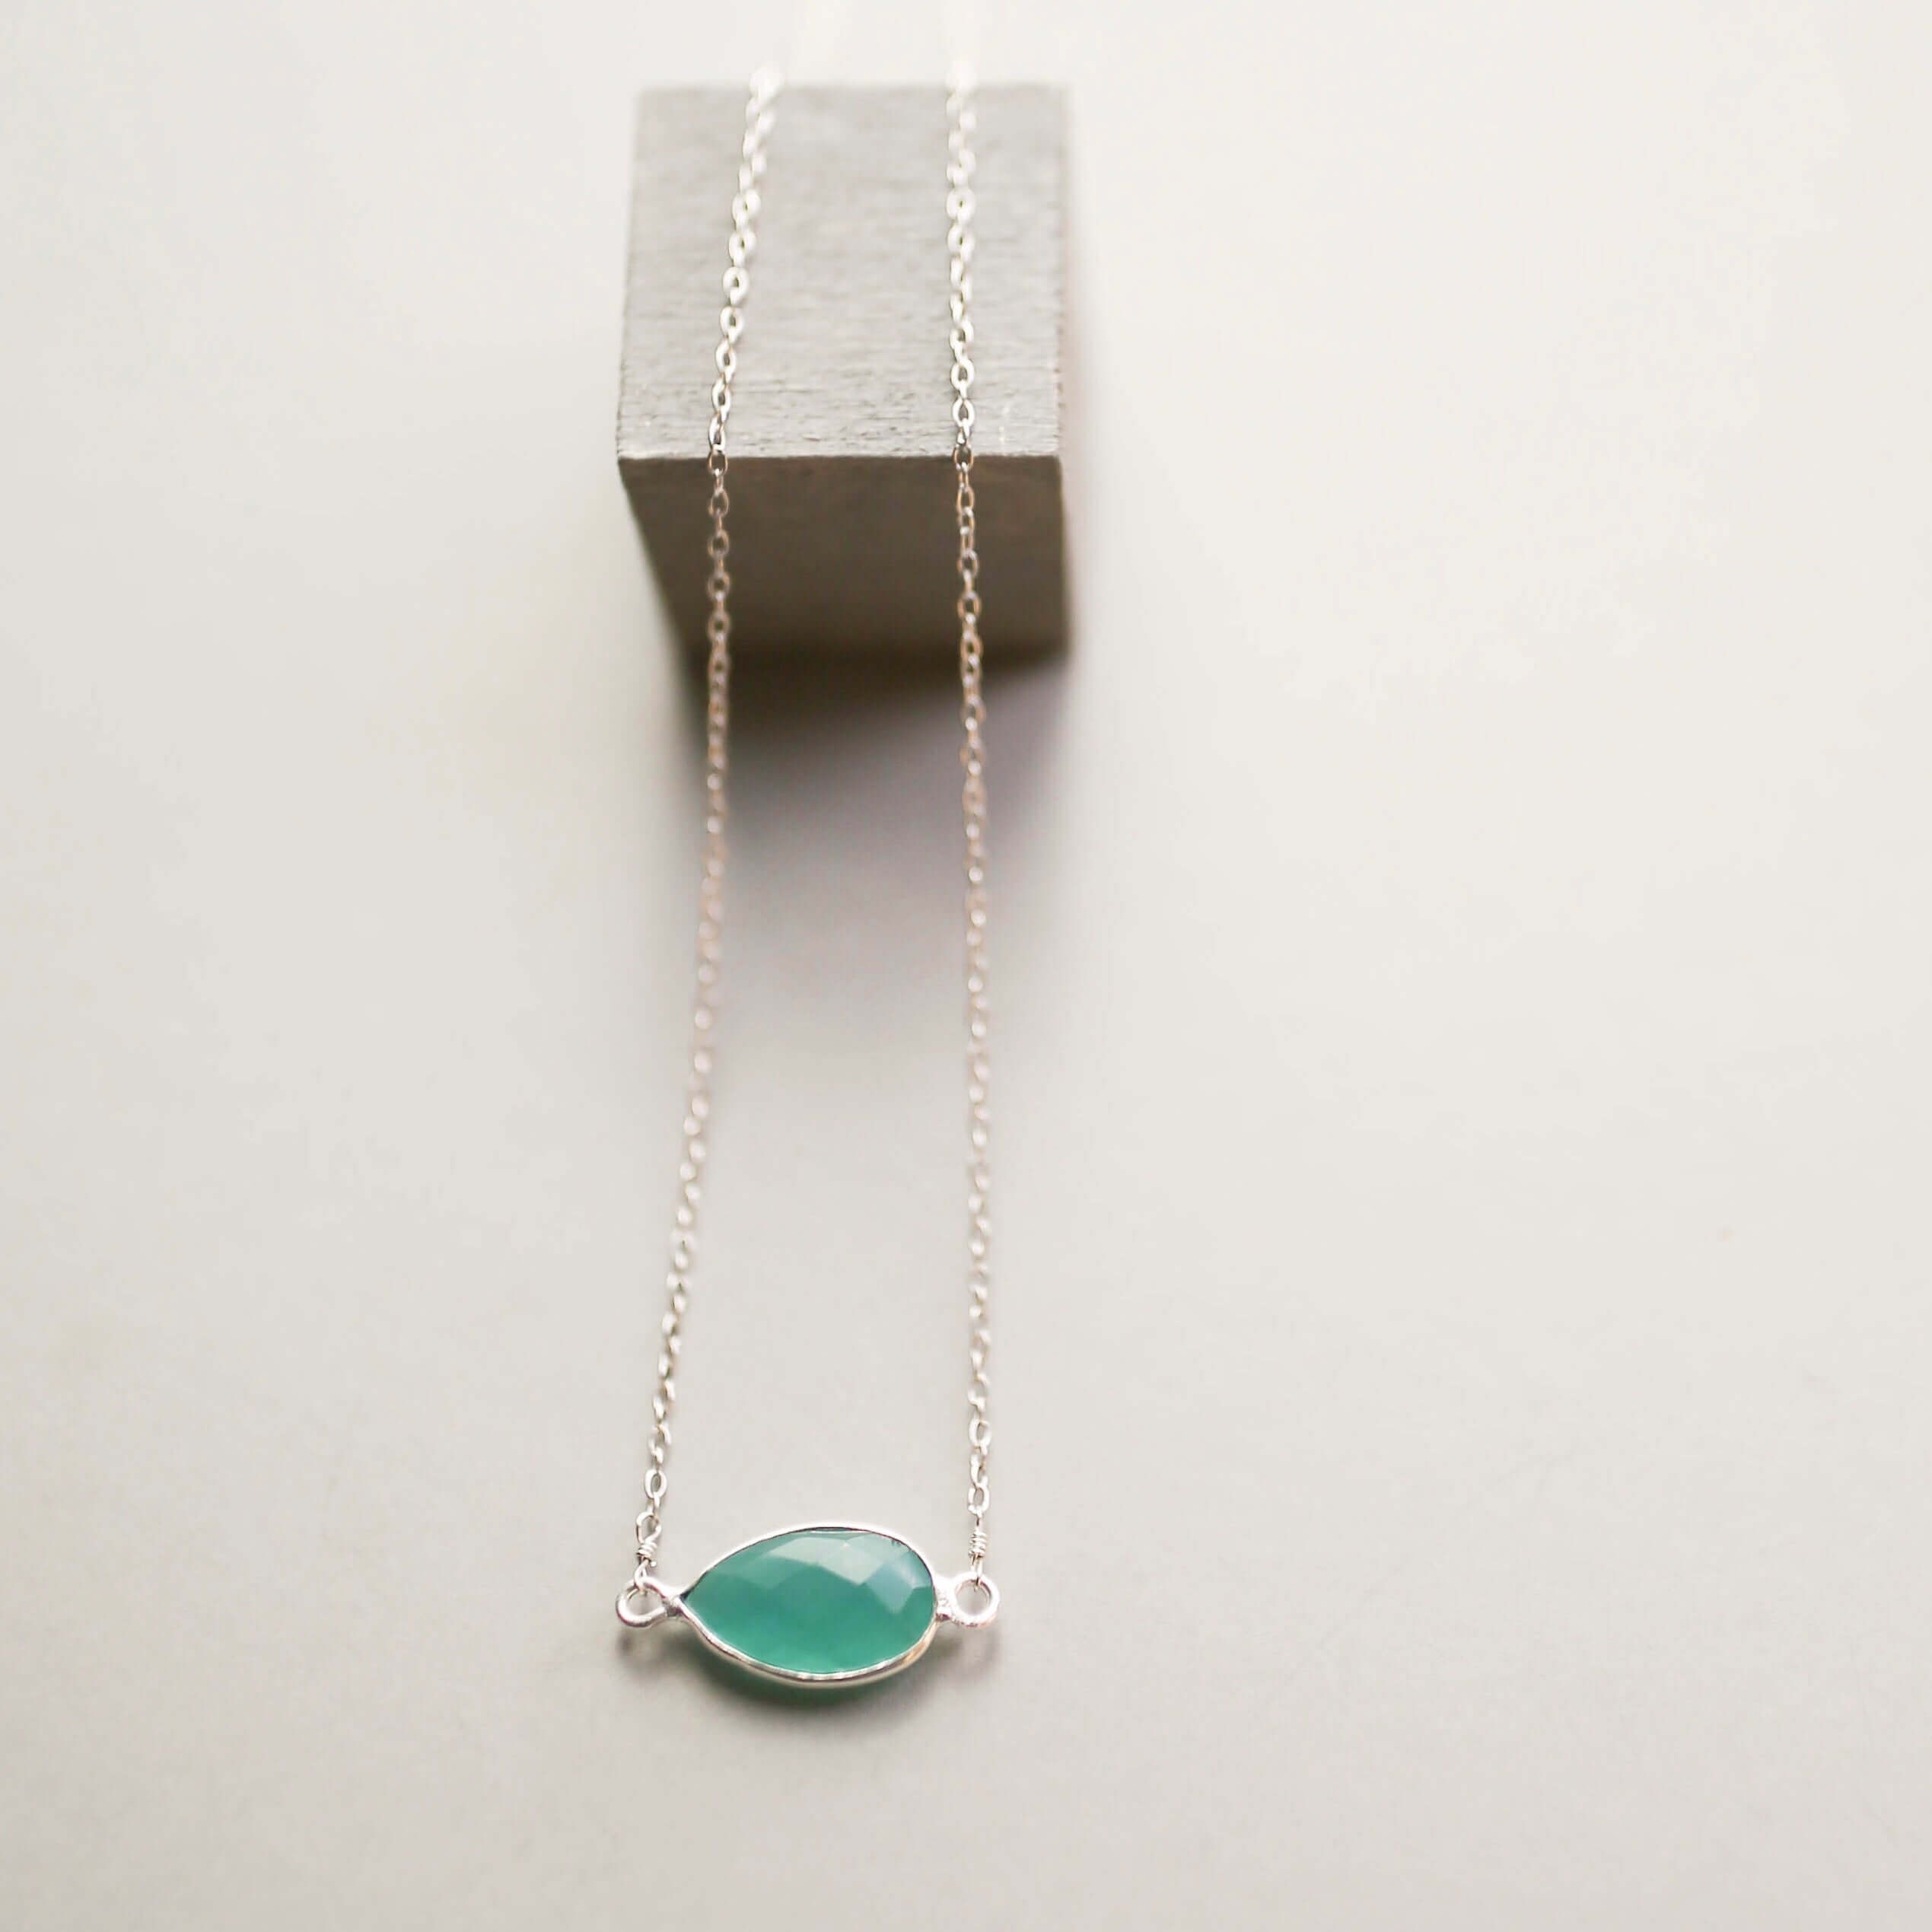 Minimalist Silver Necklace Featuring a Green Apatite Stone